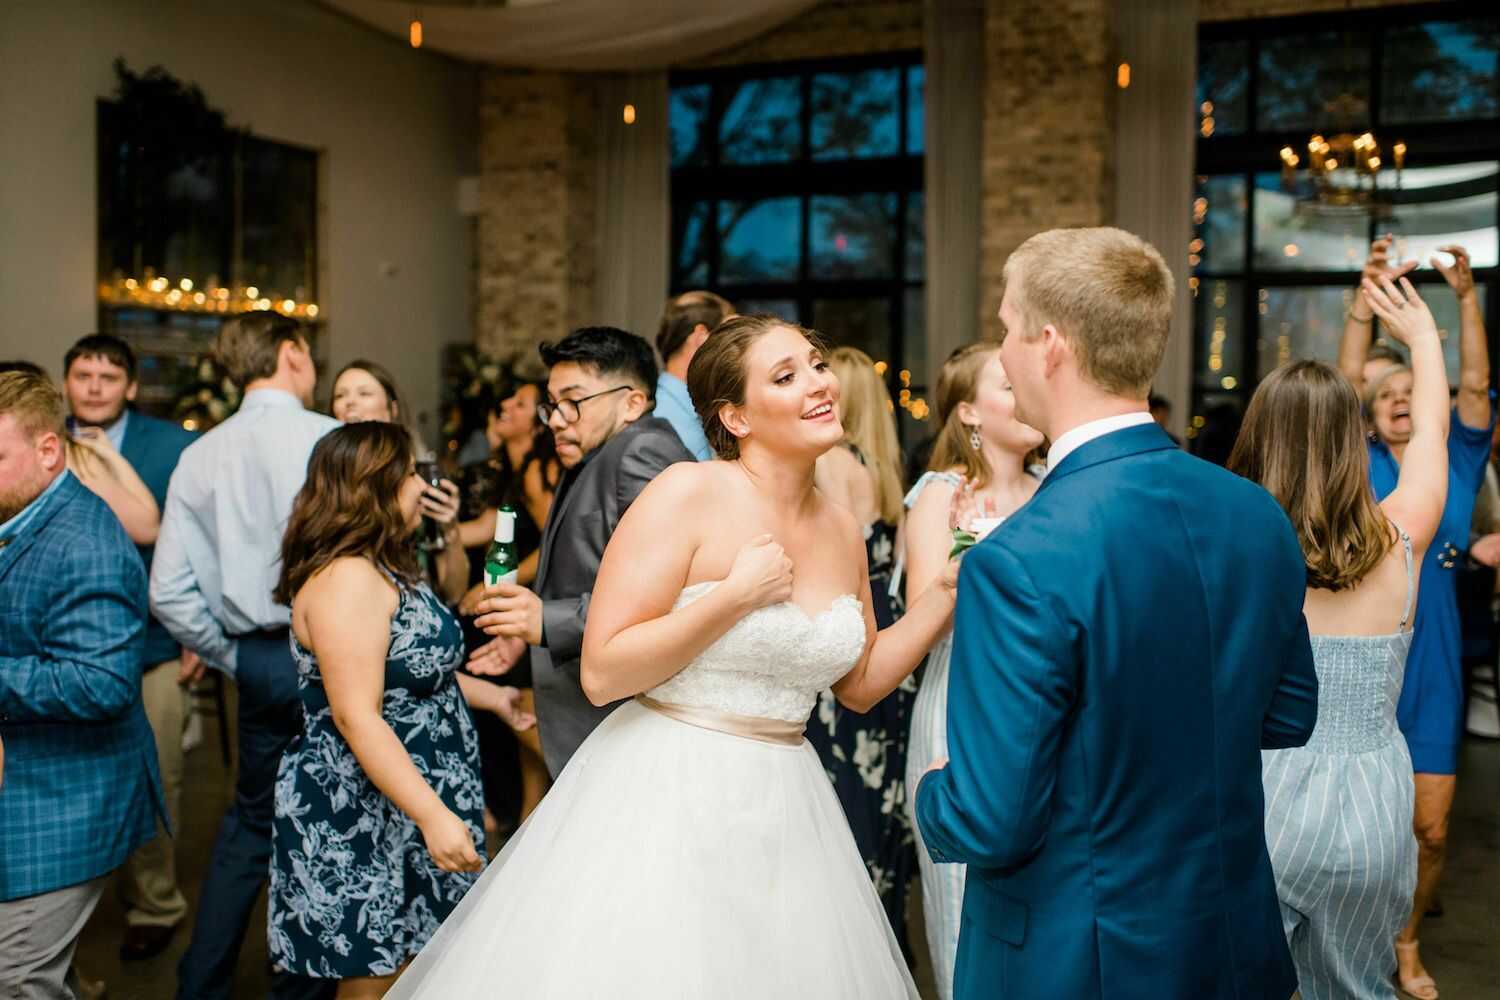 50 Upbeat First Dance Songs for Your Wedding